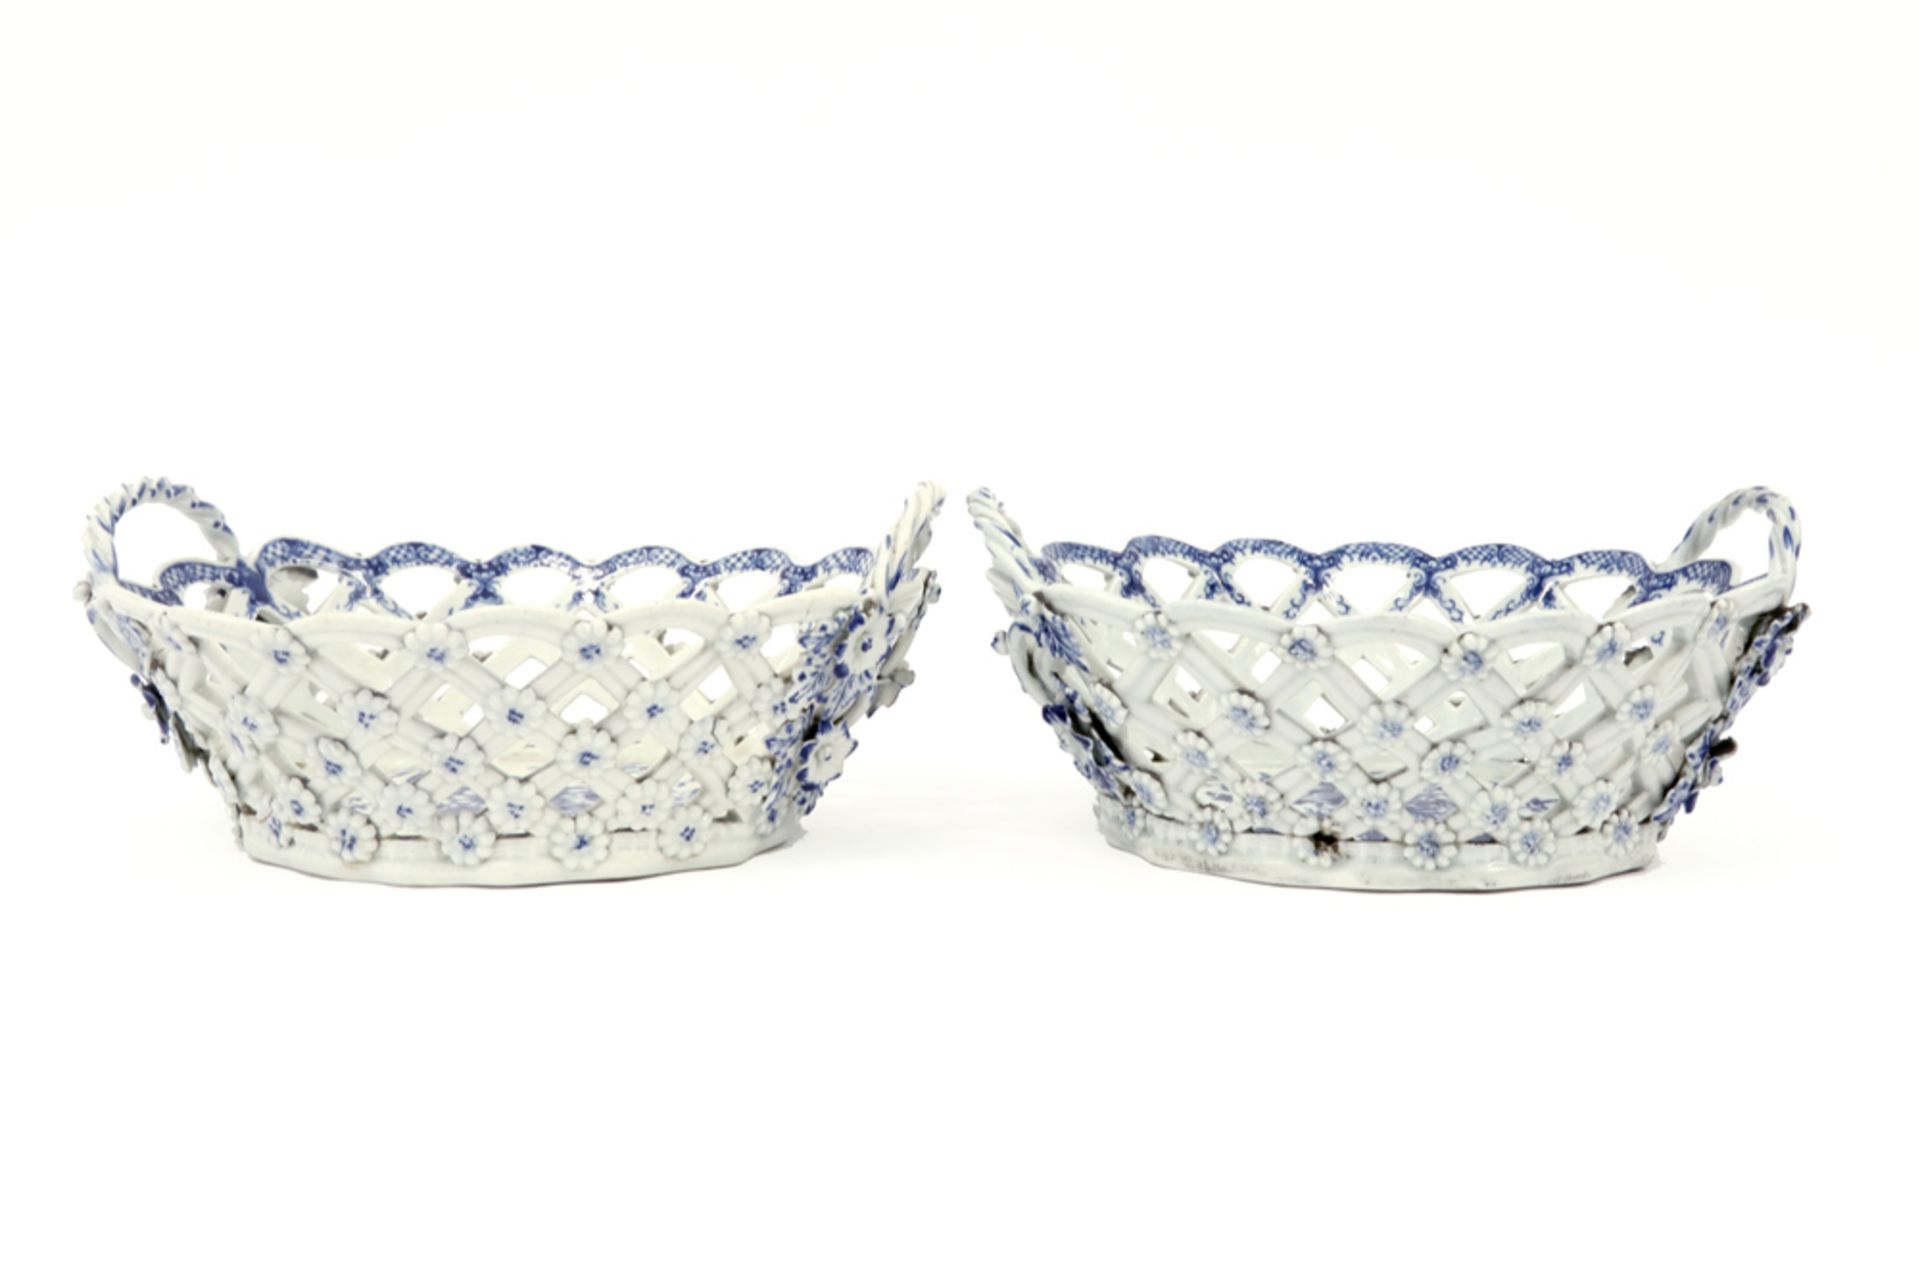 pair of 18th Cent. English Worcester marked baskets in open work ceramic with a blue-white flower - Image 2 of 5